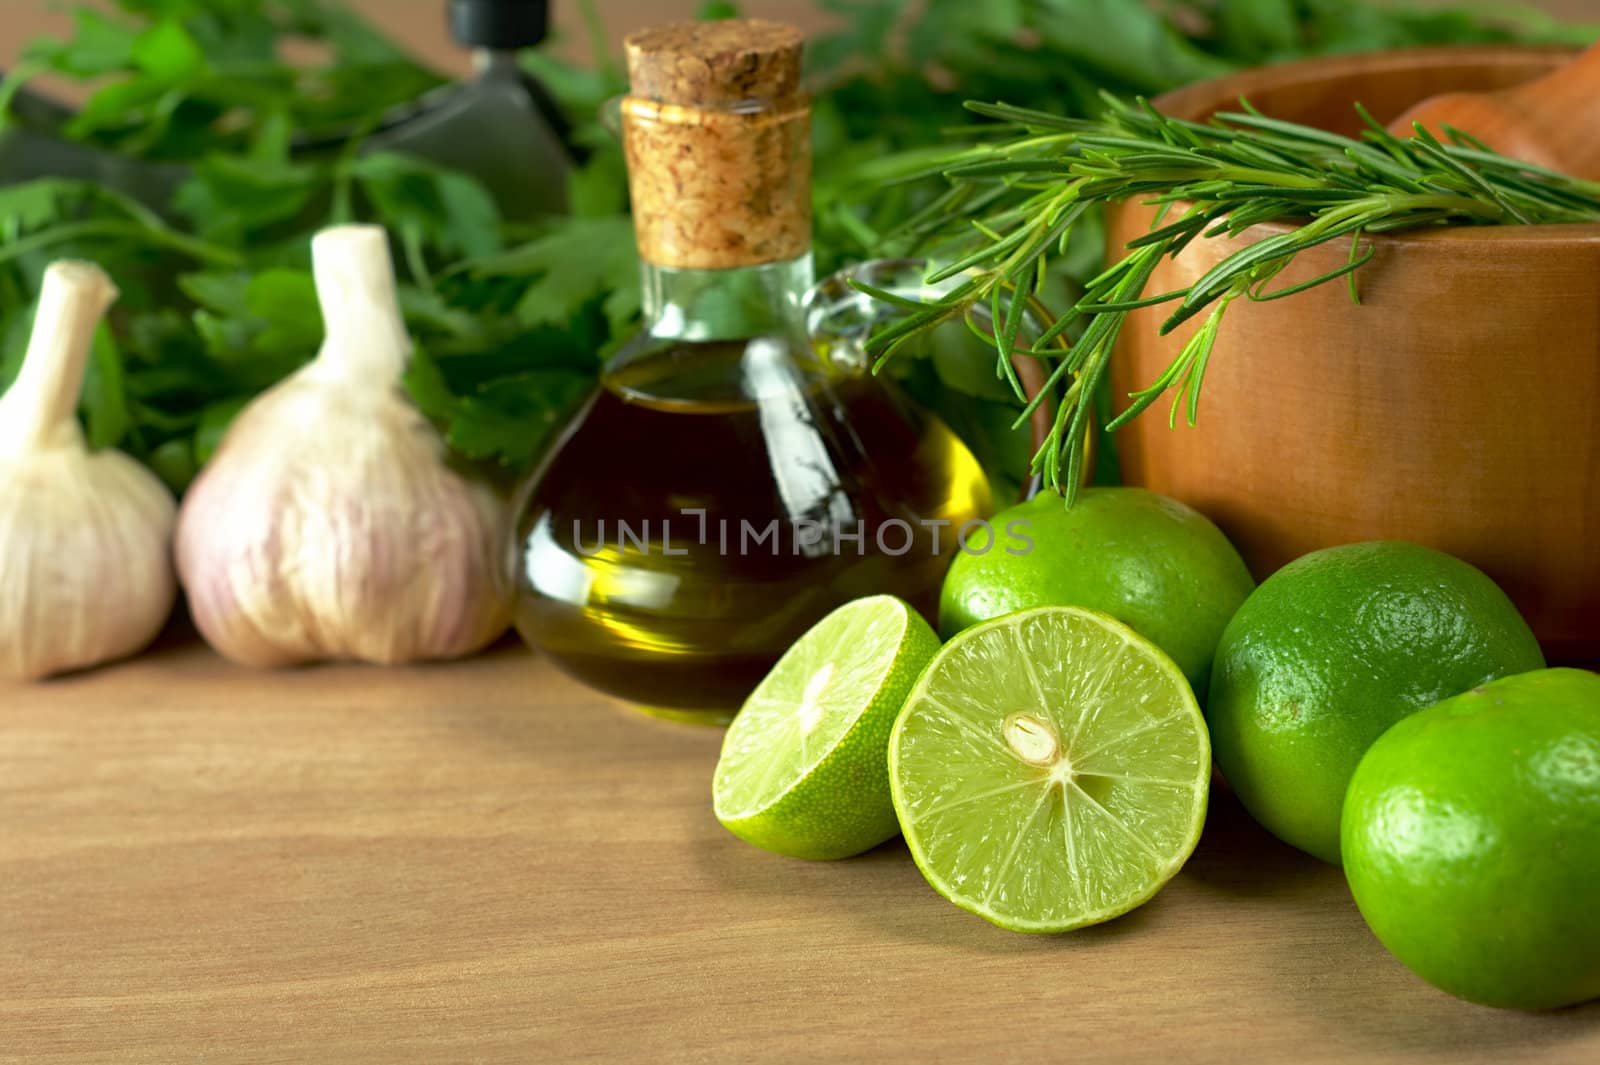 Limes and Other Seasonings by ildi